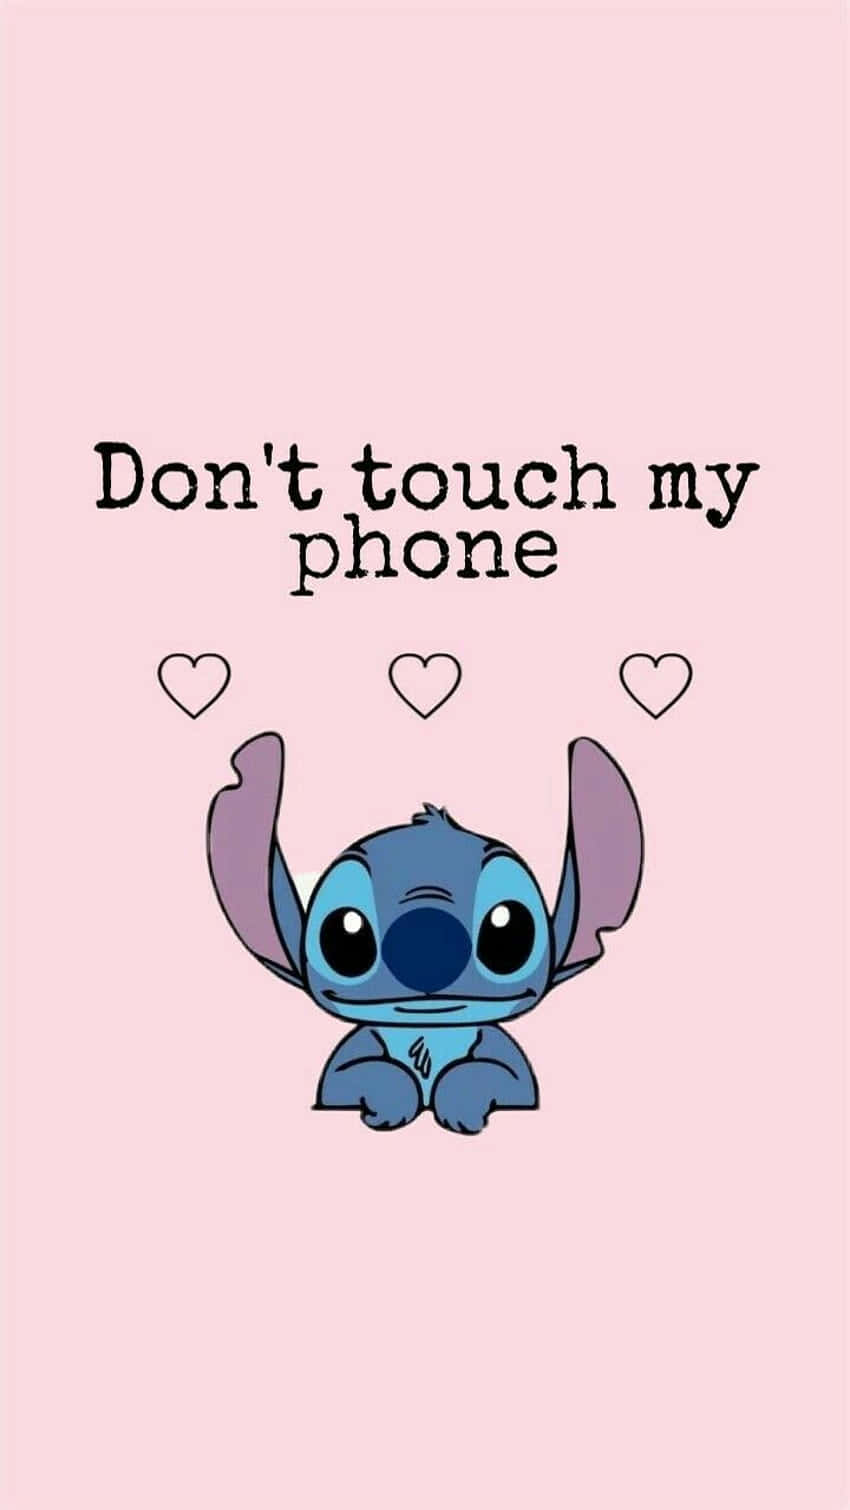 A Stitch - Emoji With The Words Don't Touch My Phone Wallpaper